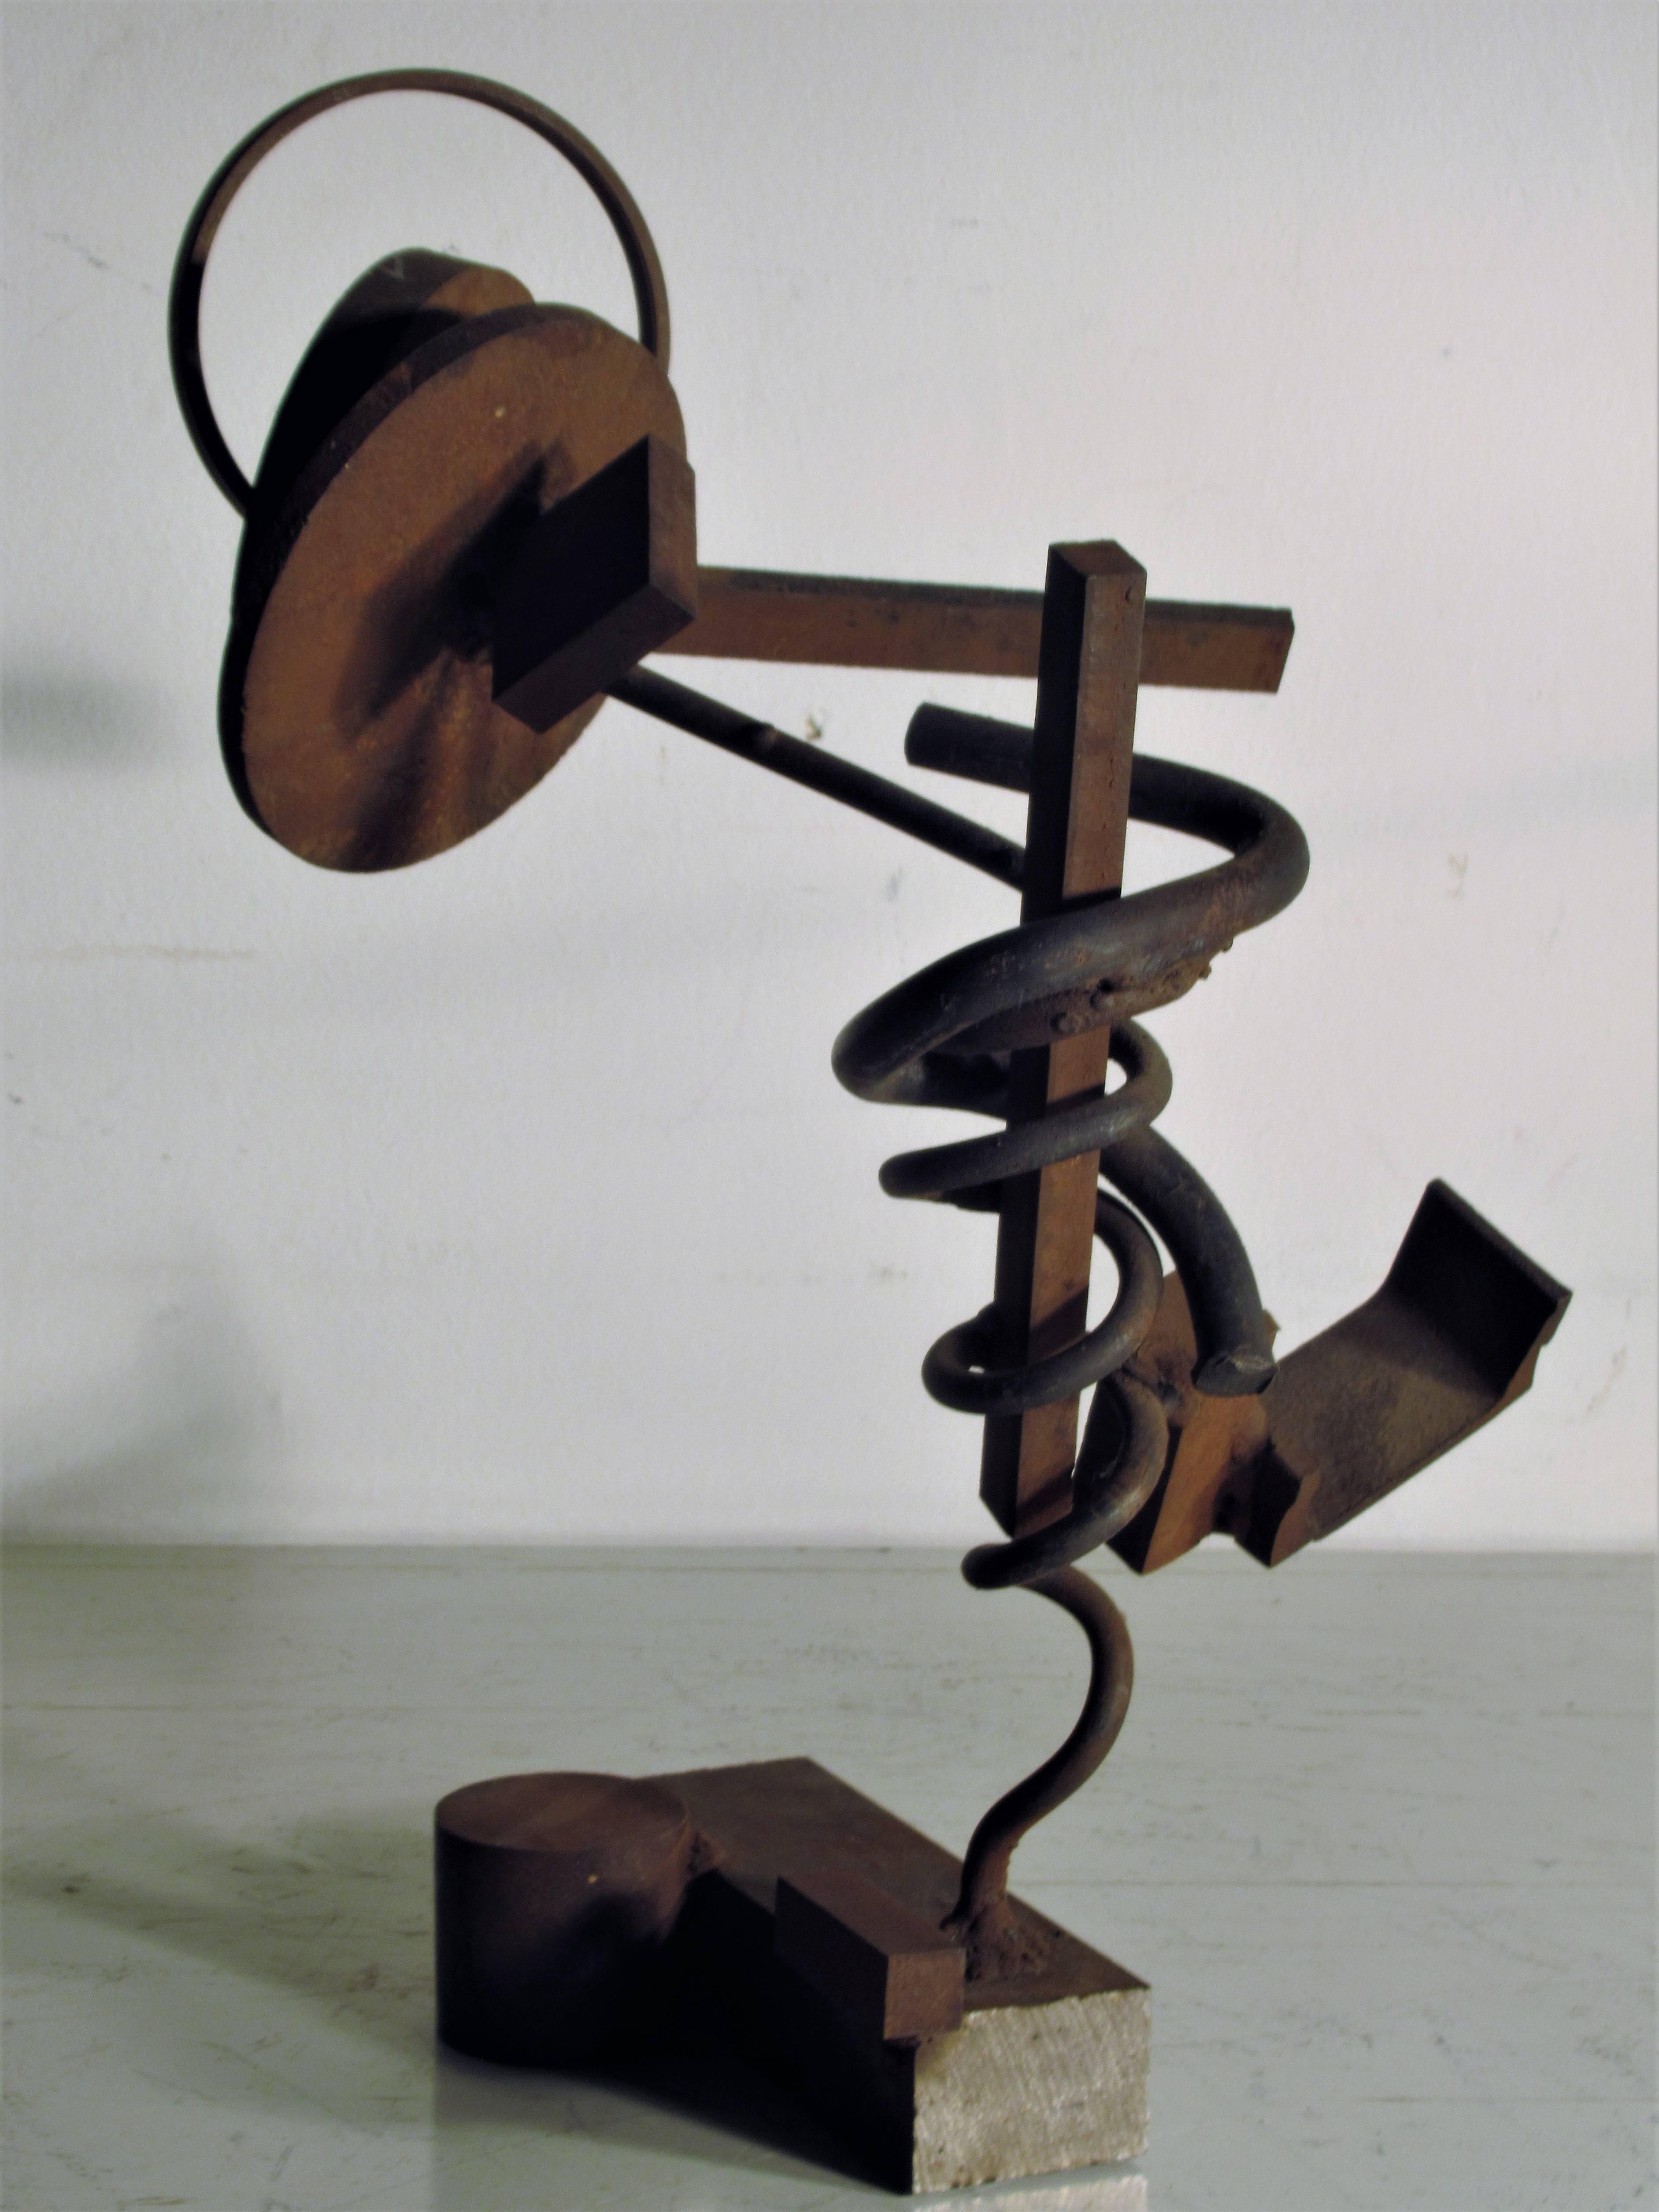   Steel Construction Sculpture by William Sellers 6